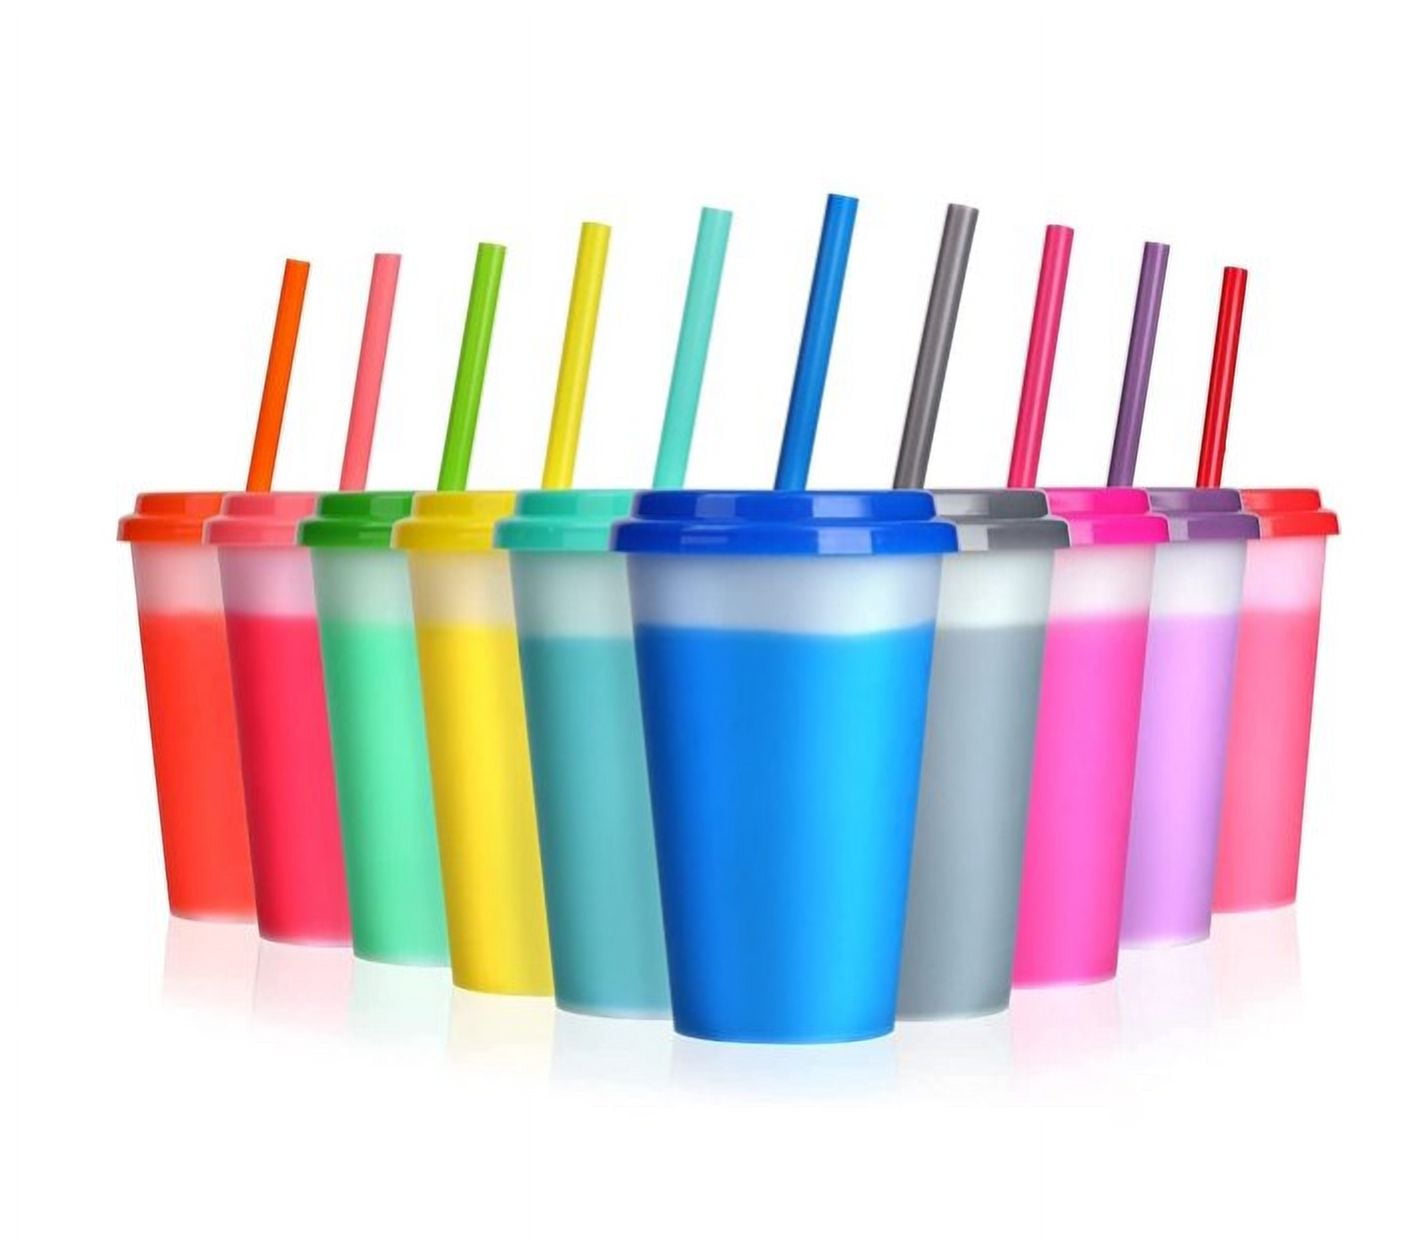 Re Play Made in USA 10 Oz. Straw Cups for Toddlers, Pack of 3 - Reusable  Kids Cups with Straws and L…See more Re Play Made in USA 10 Oz. Straw Cups